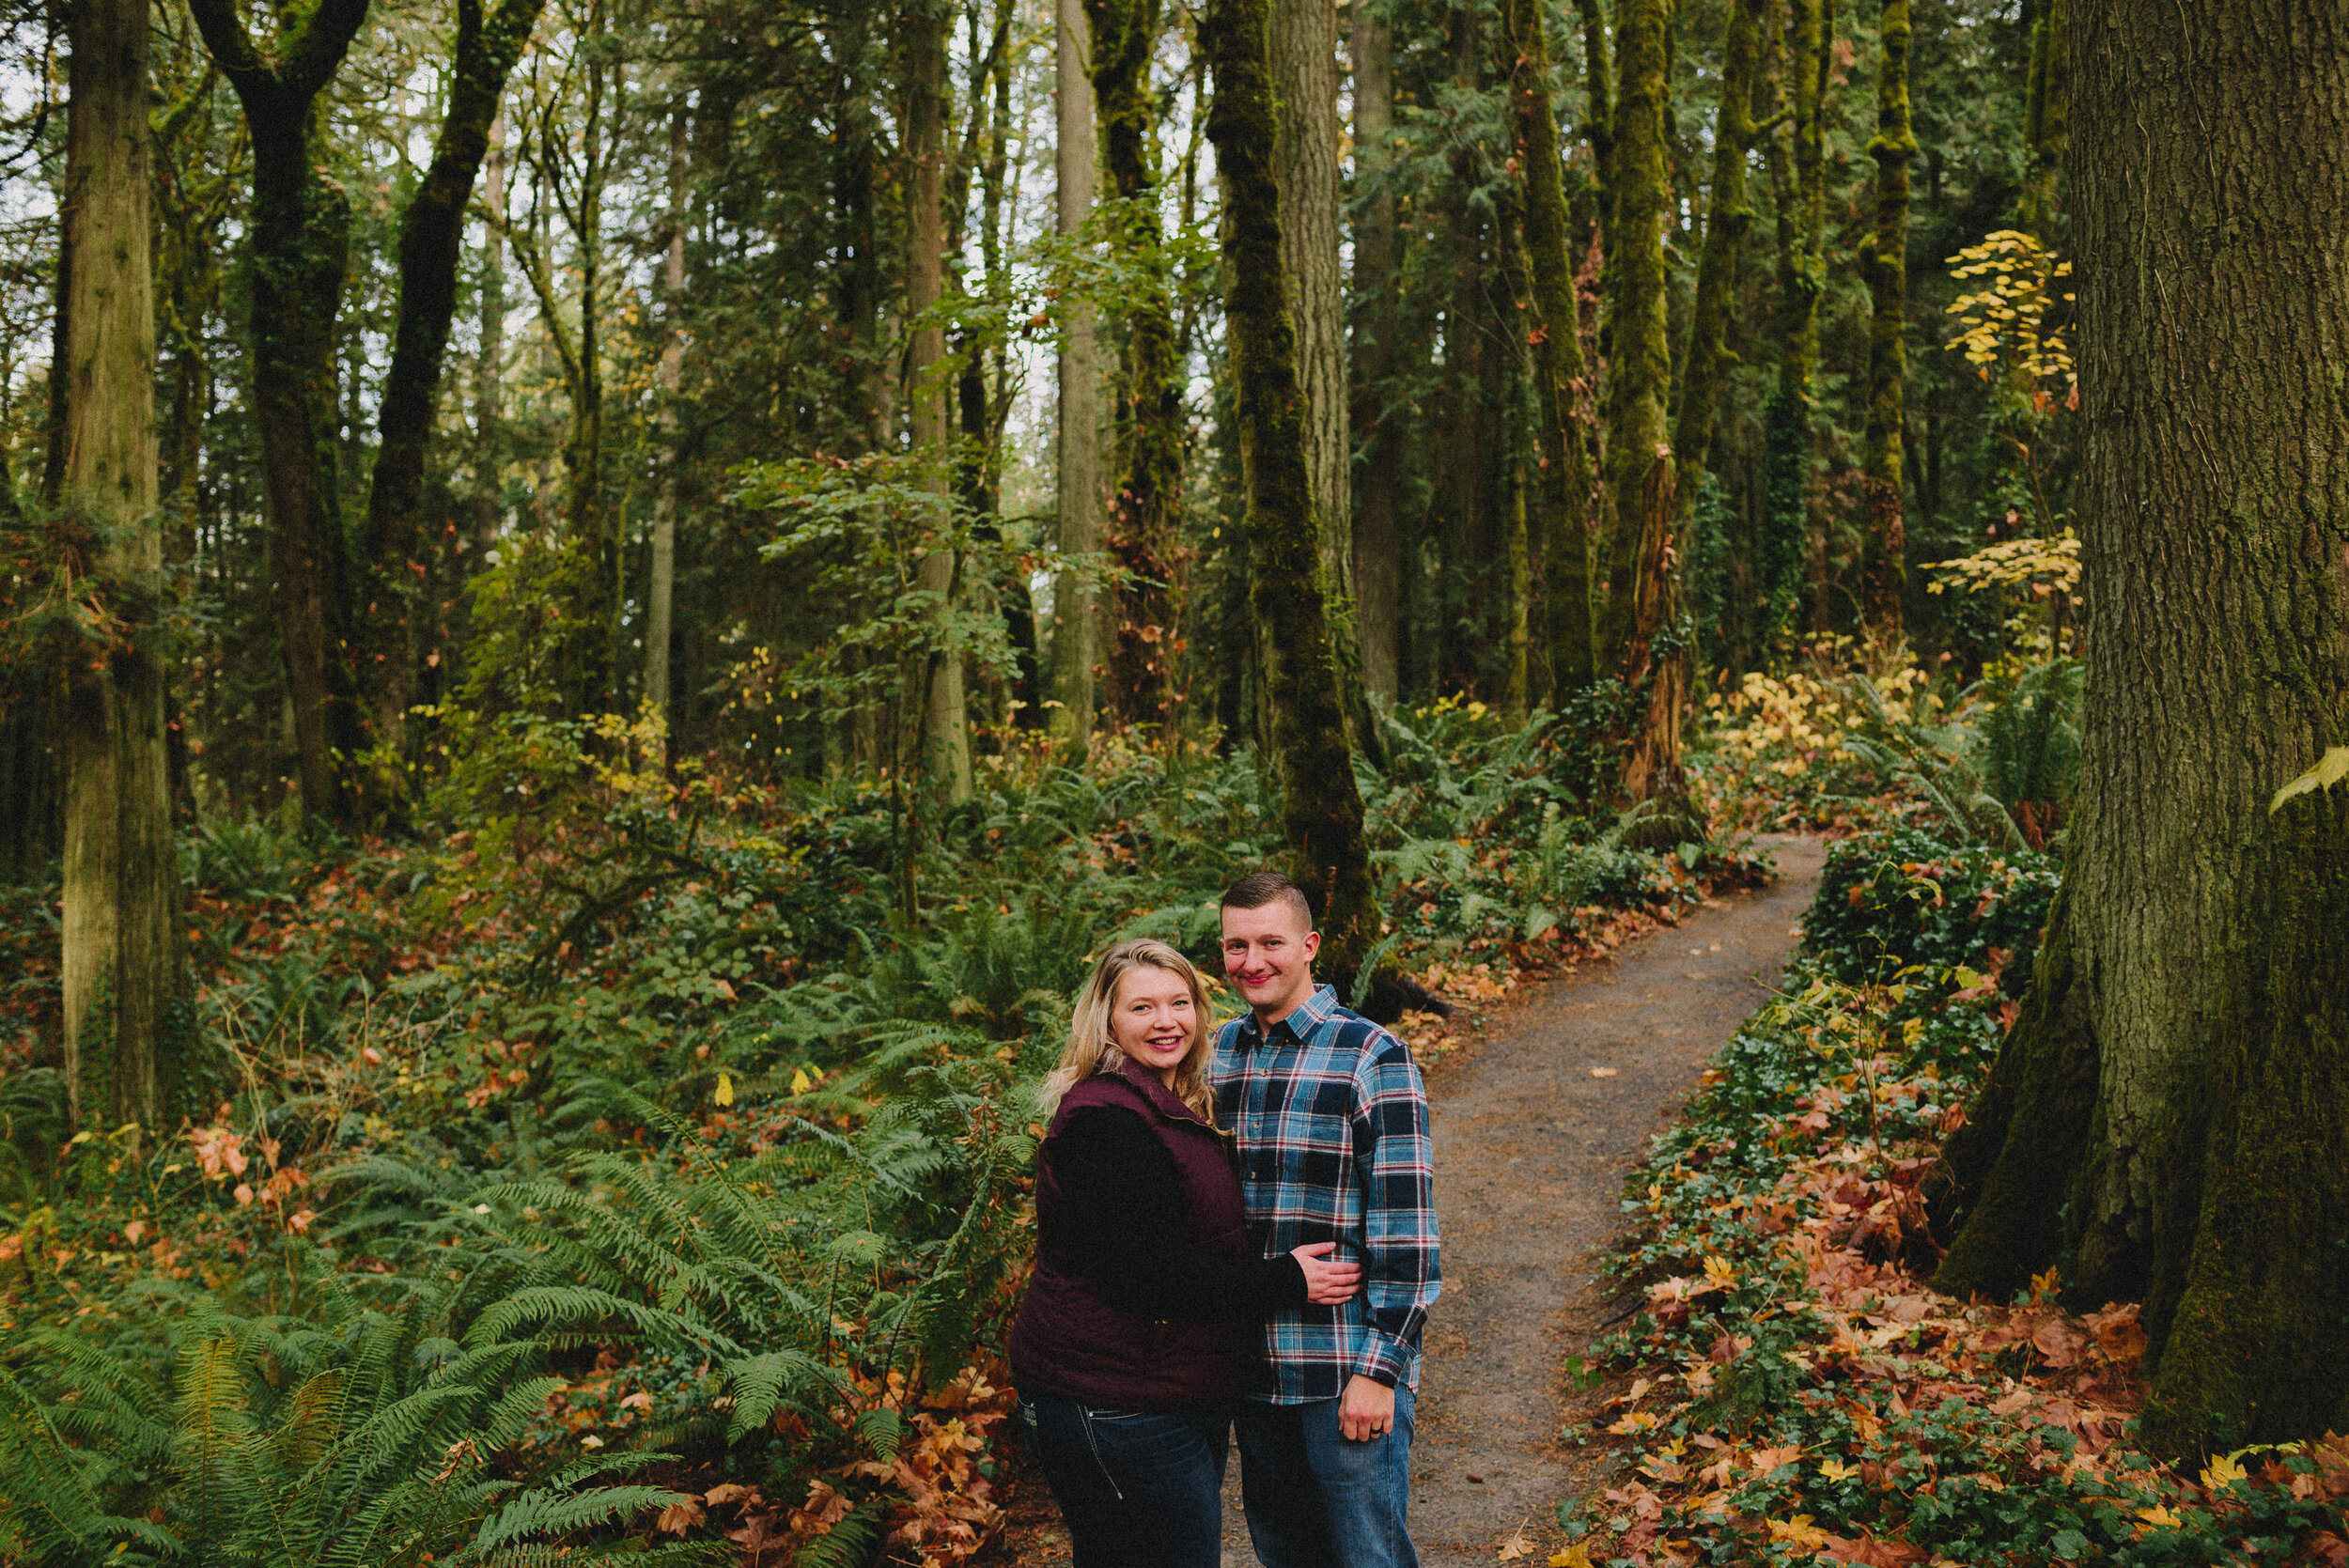 priest-point-park-couples-session-olympia-washington-way-up-north-photography (25).jpg